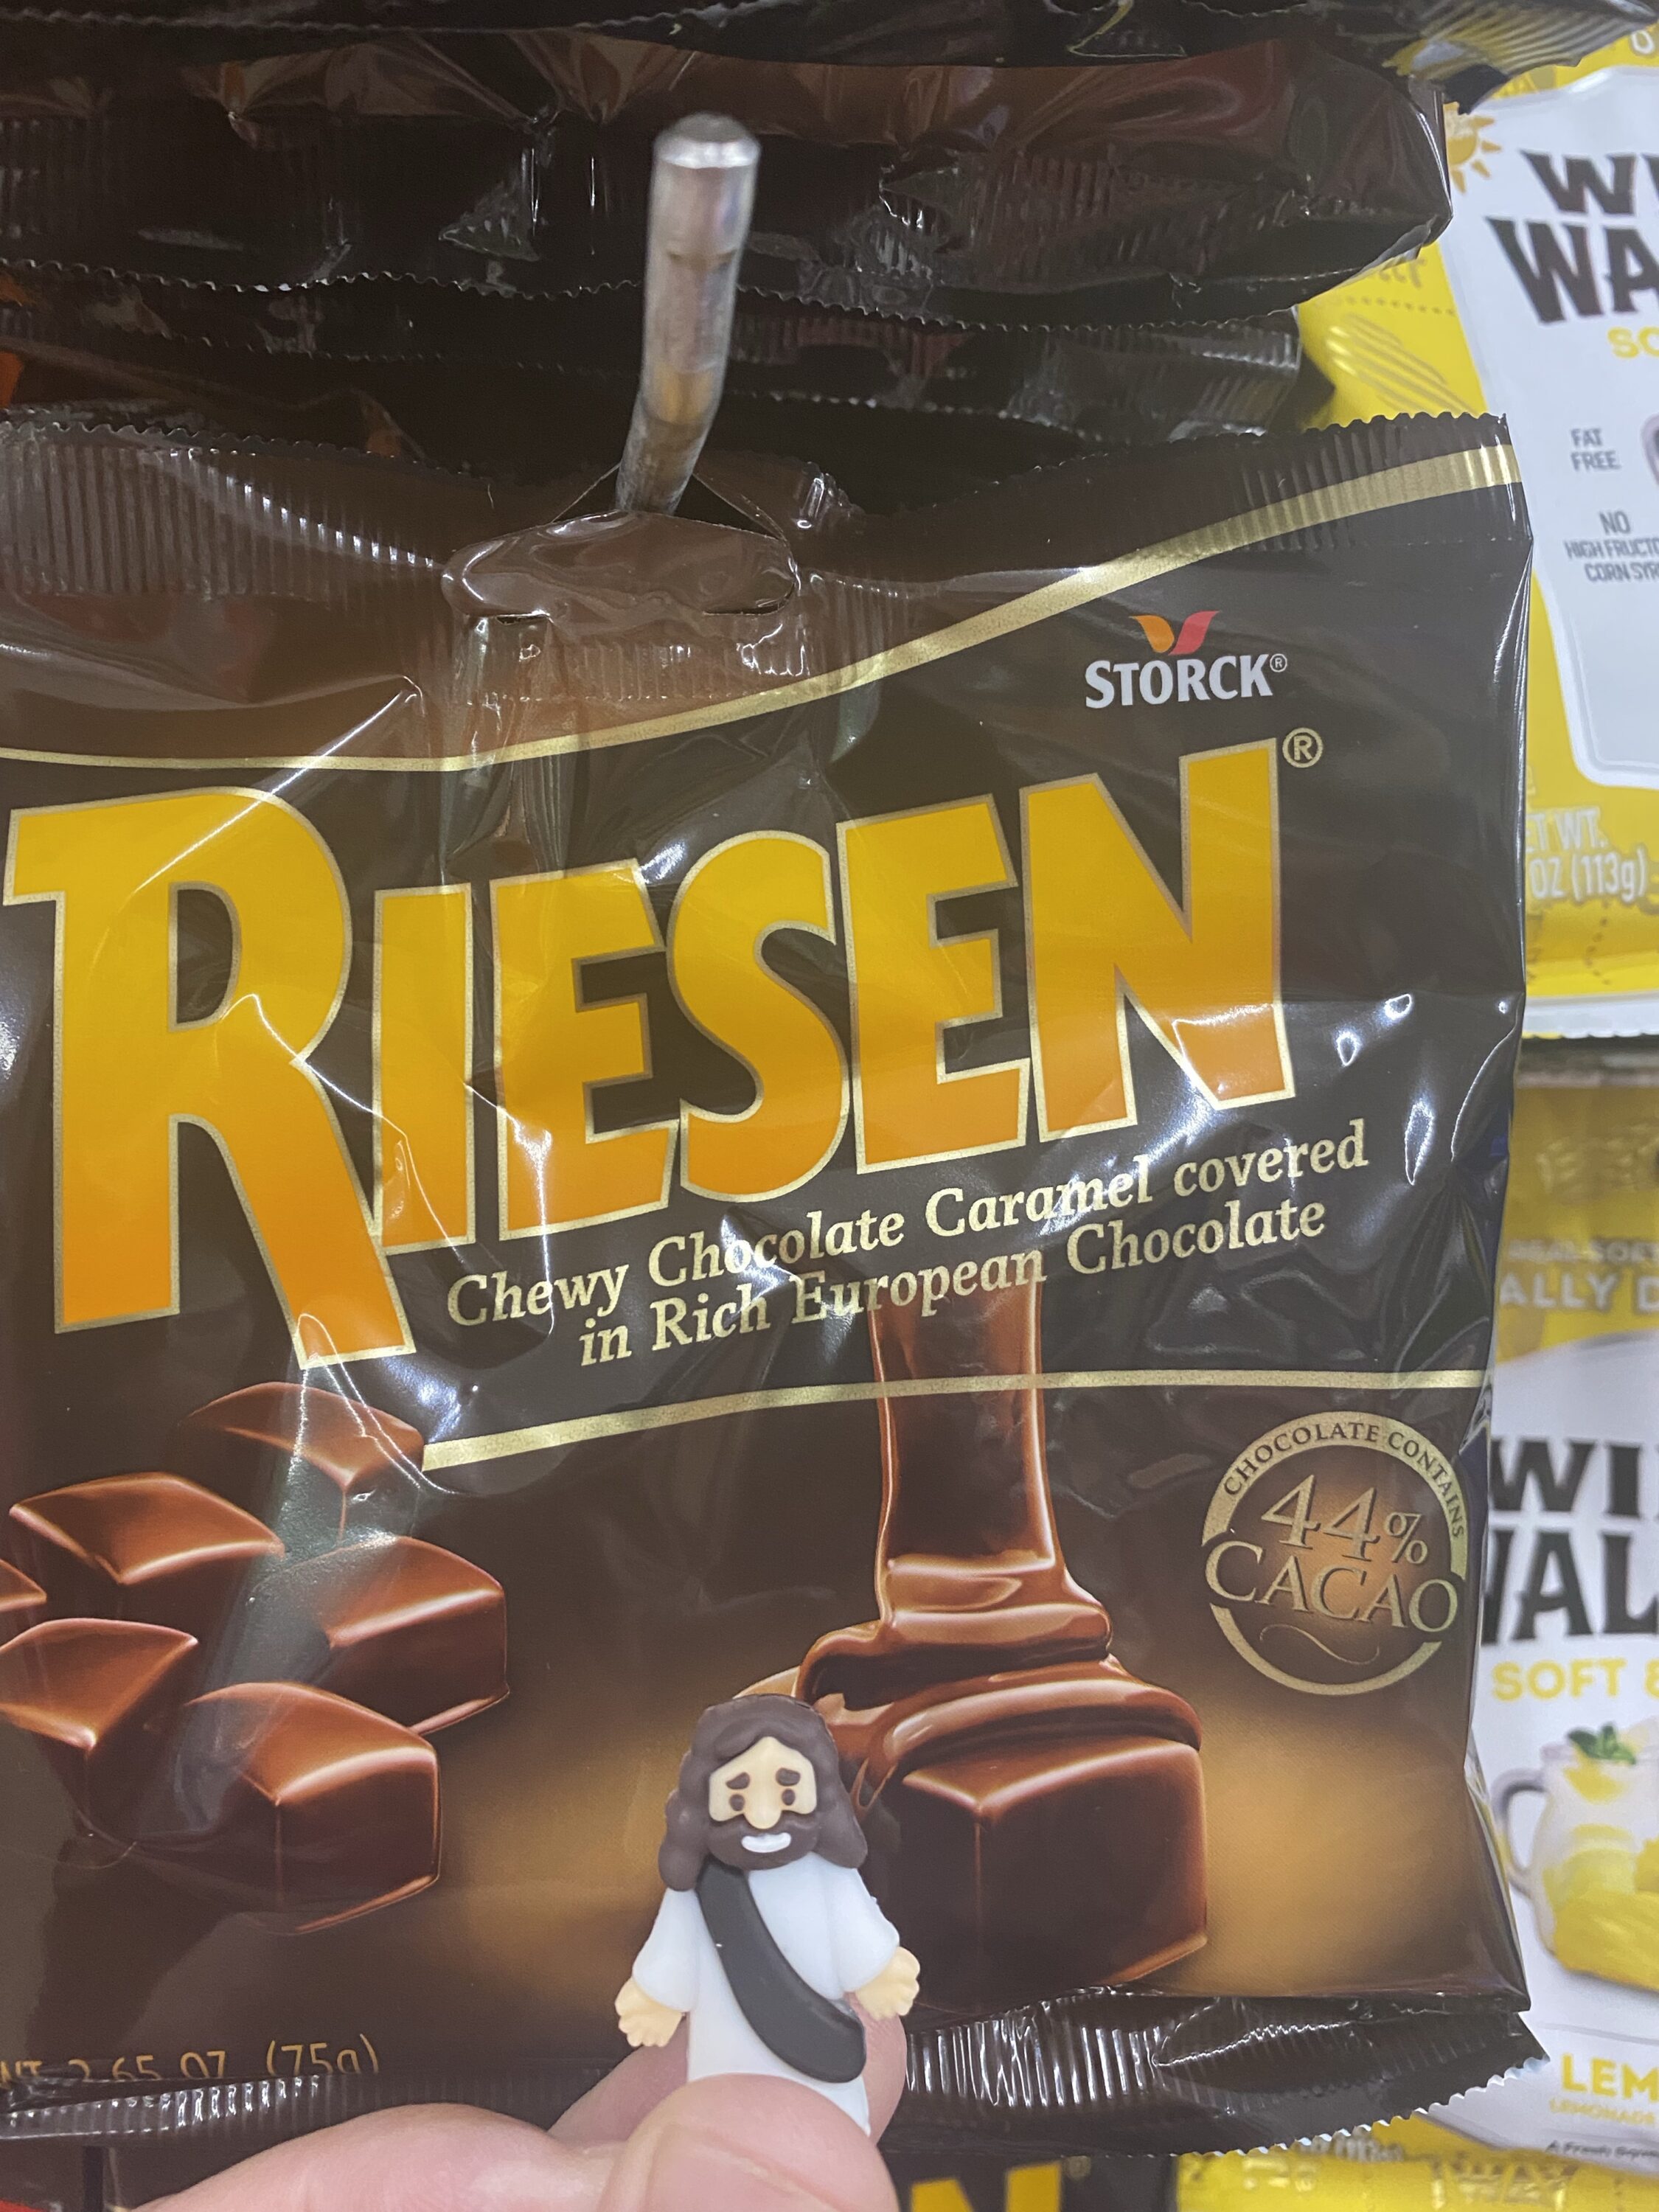 Using a play on words, pair a Mini Jesus with Riesen candy. Jesus is Risen! #Riesen ​